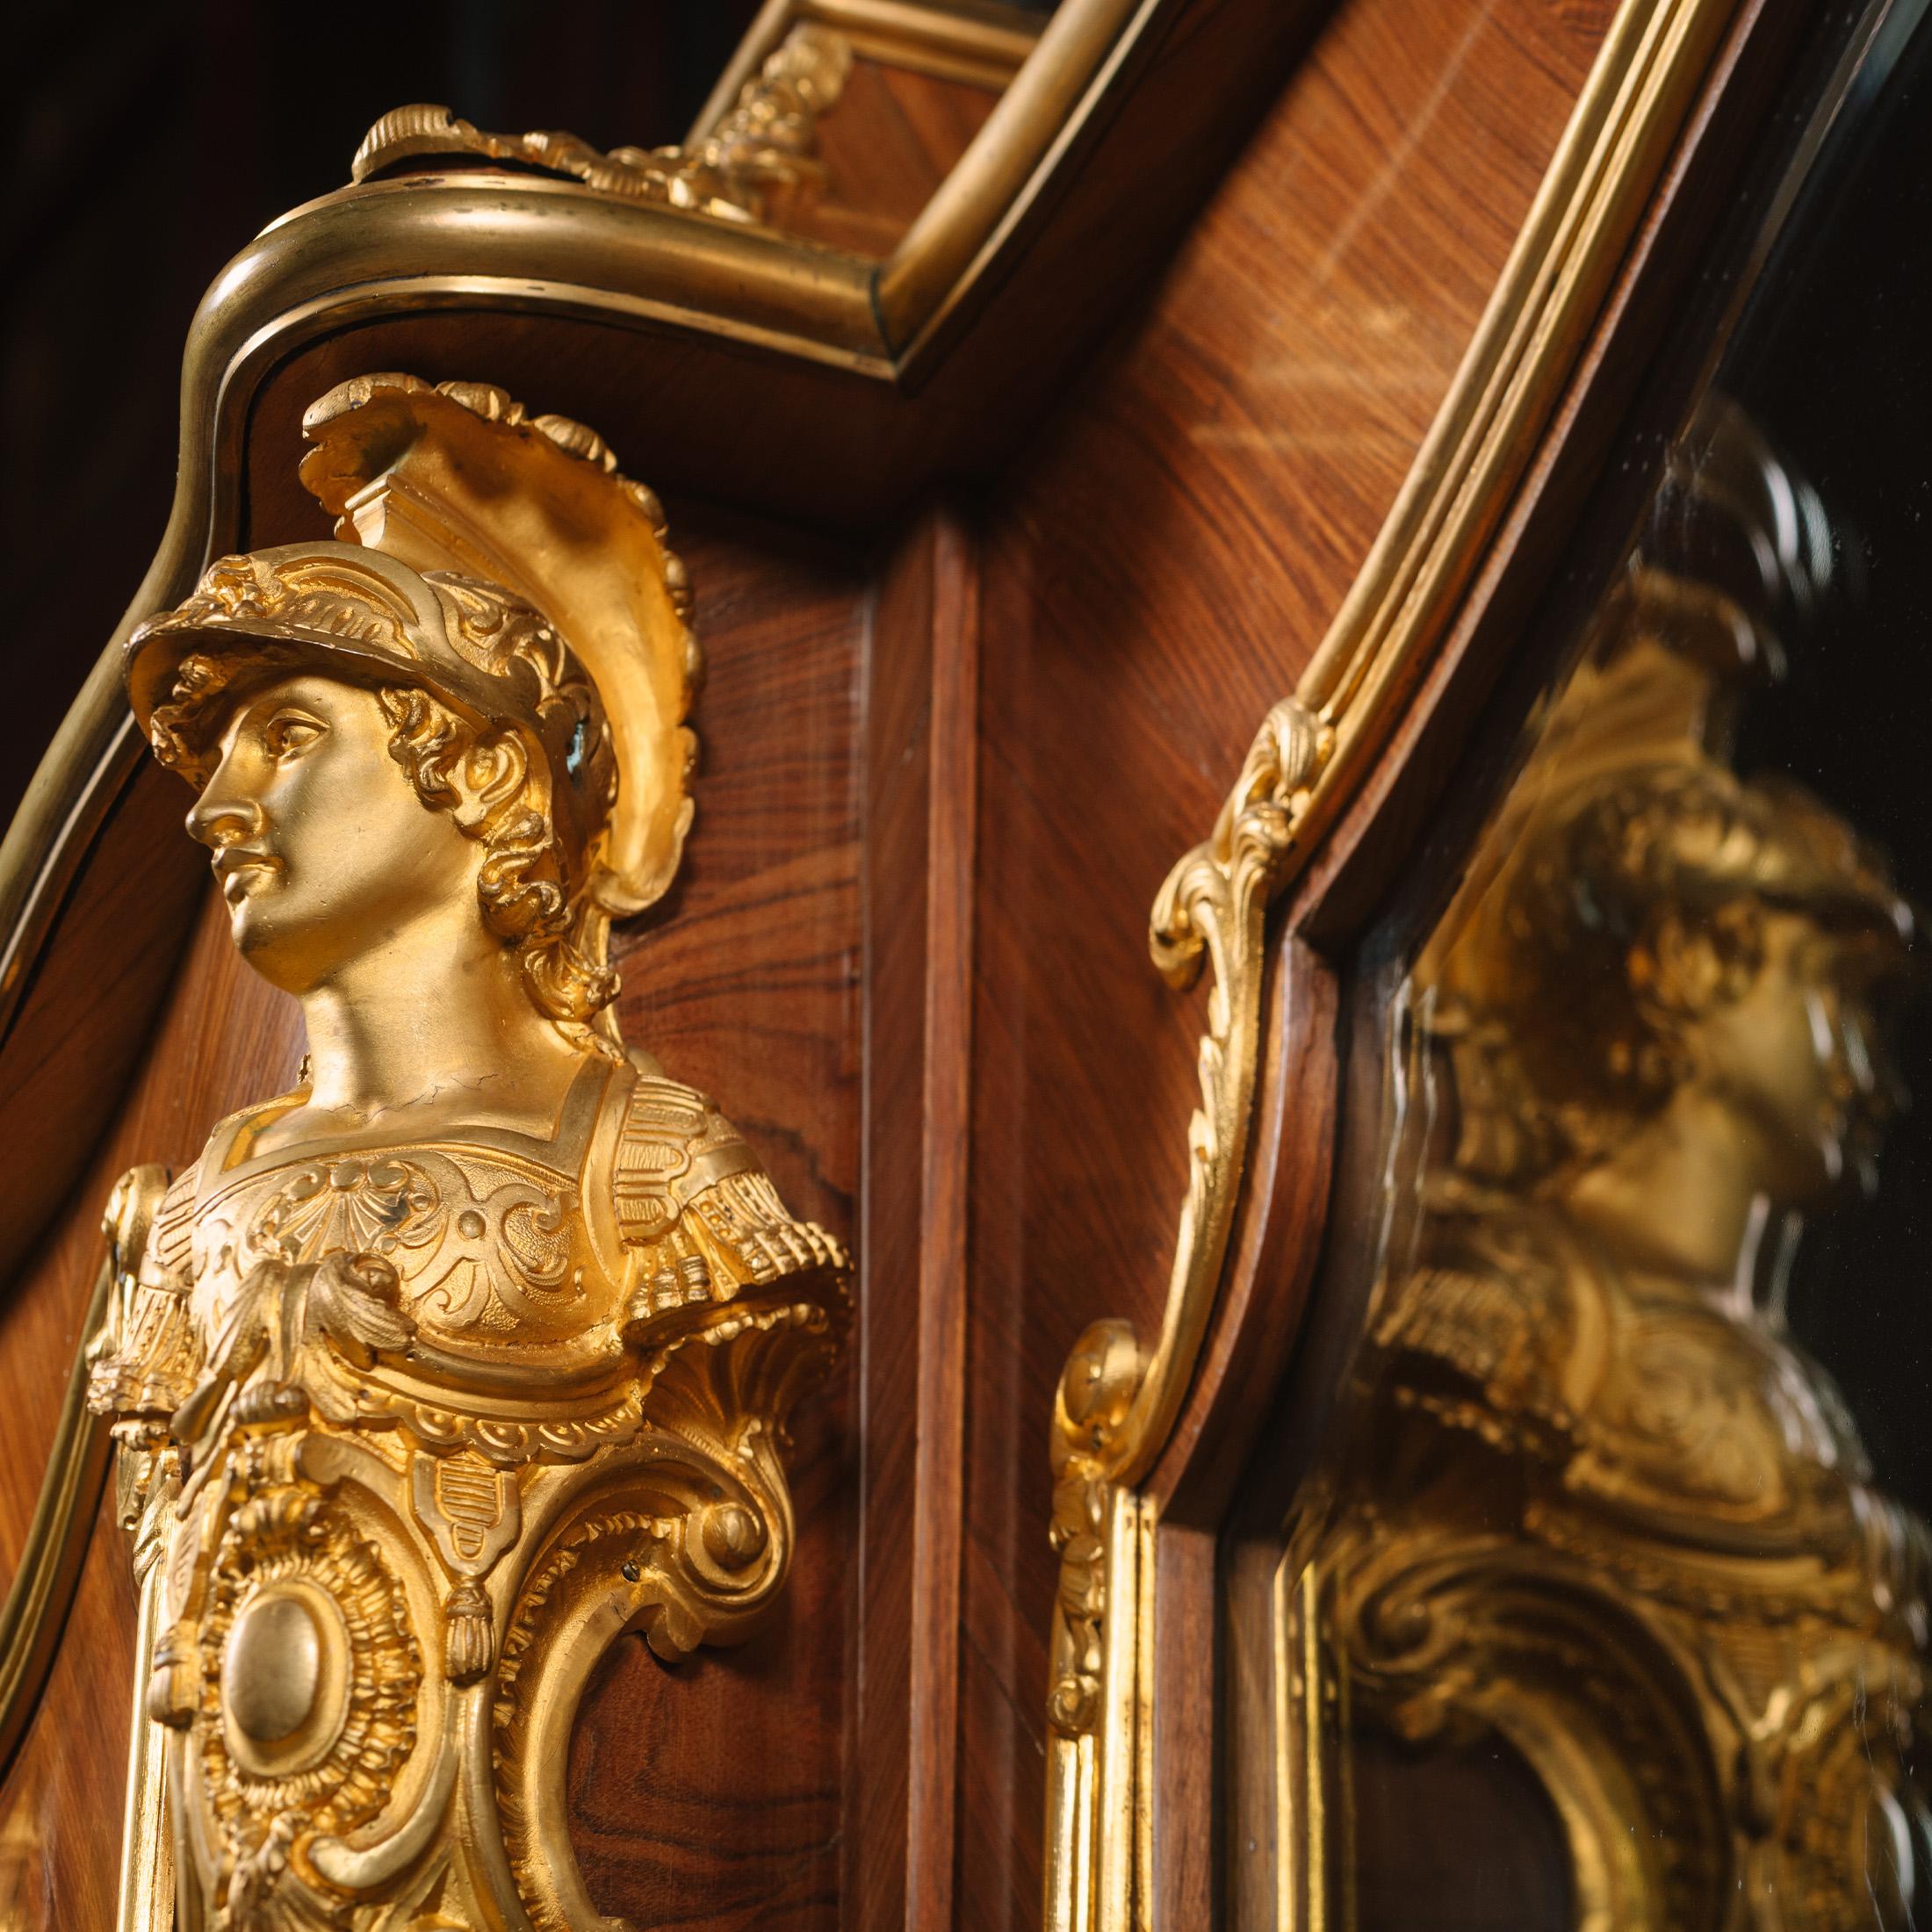 A Louis XV style gilt-bronze mounted bibliotheque, attributed to François Linke.

This bookcase is lavishly mounted with ormolu, notably the busts of soldiers to the angles which are known as 'têtes des guerriers antiques'. The doors are quarter